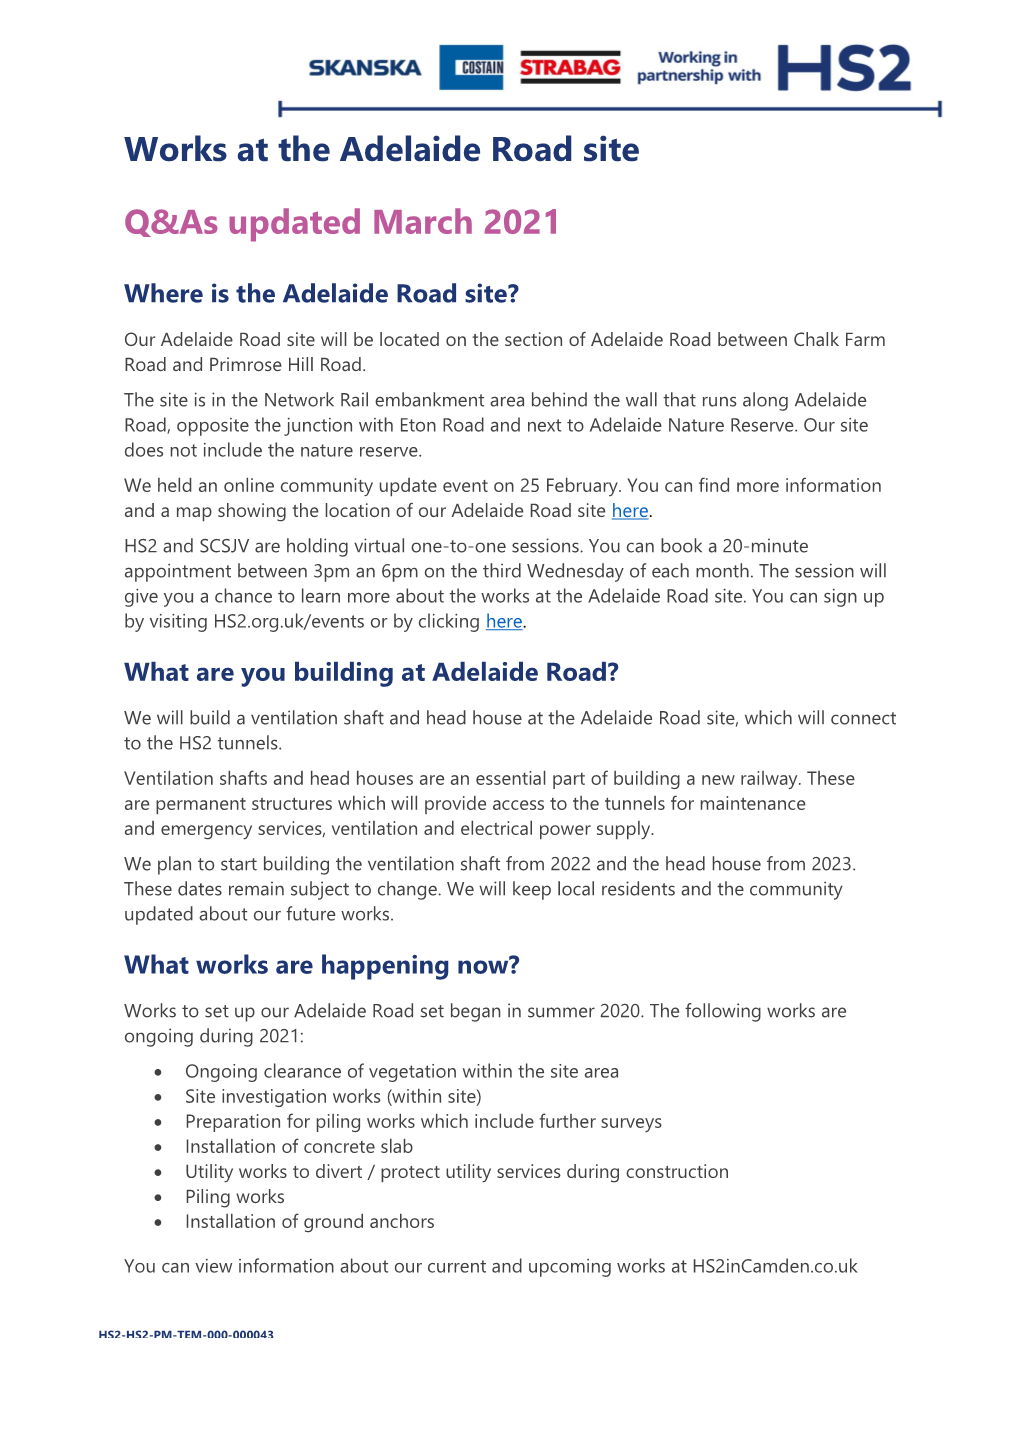 Works at the Adelaide Road Site Q&As Updated March 2021